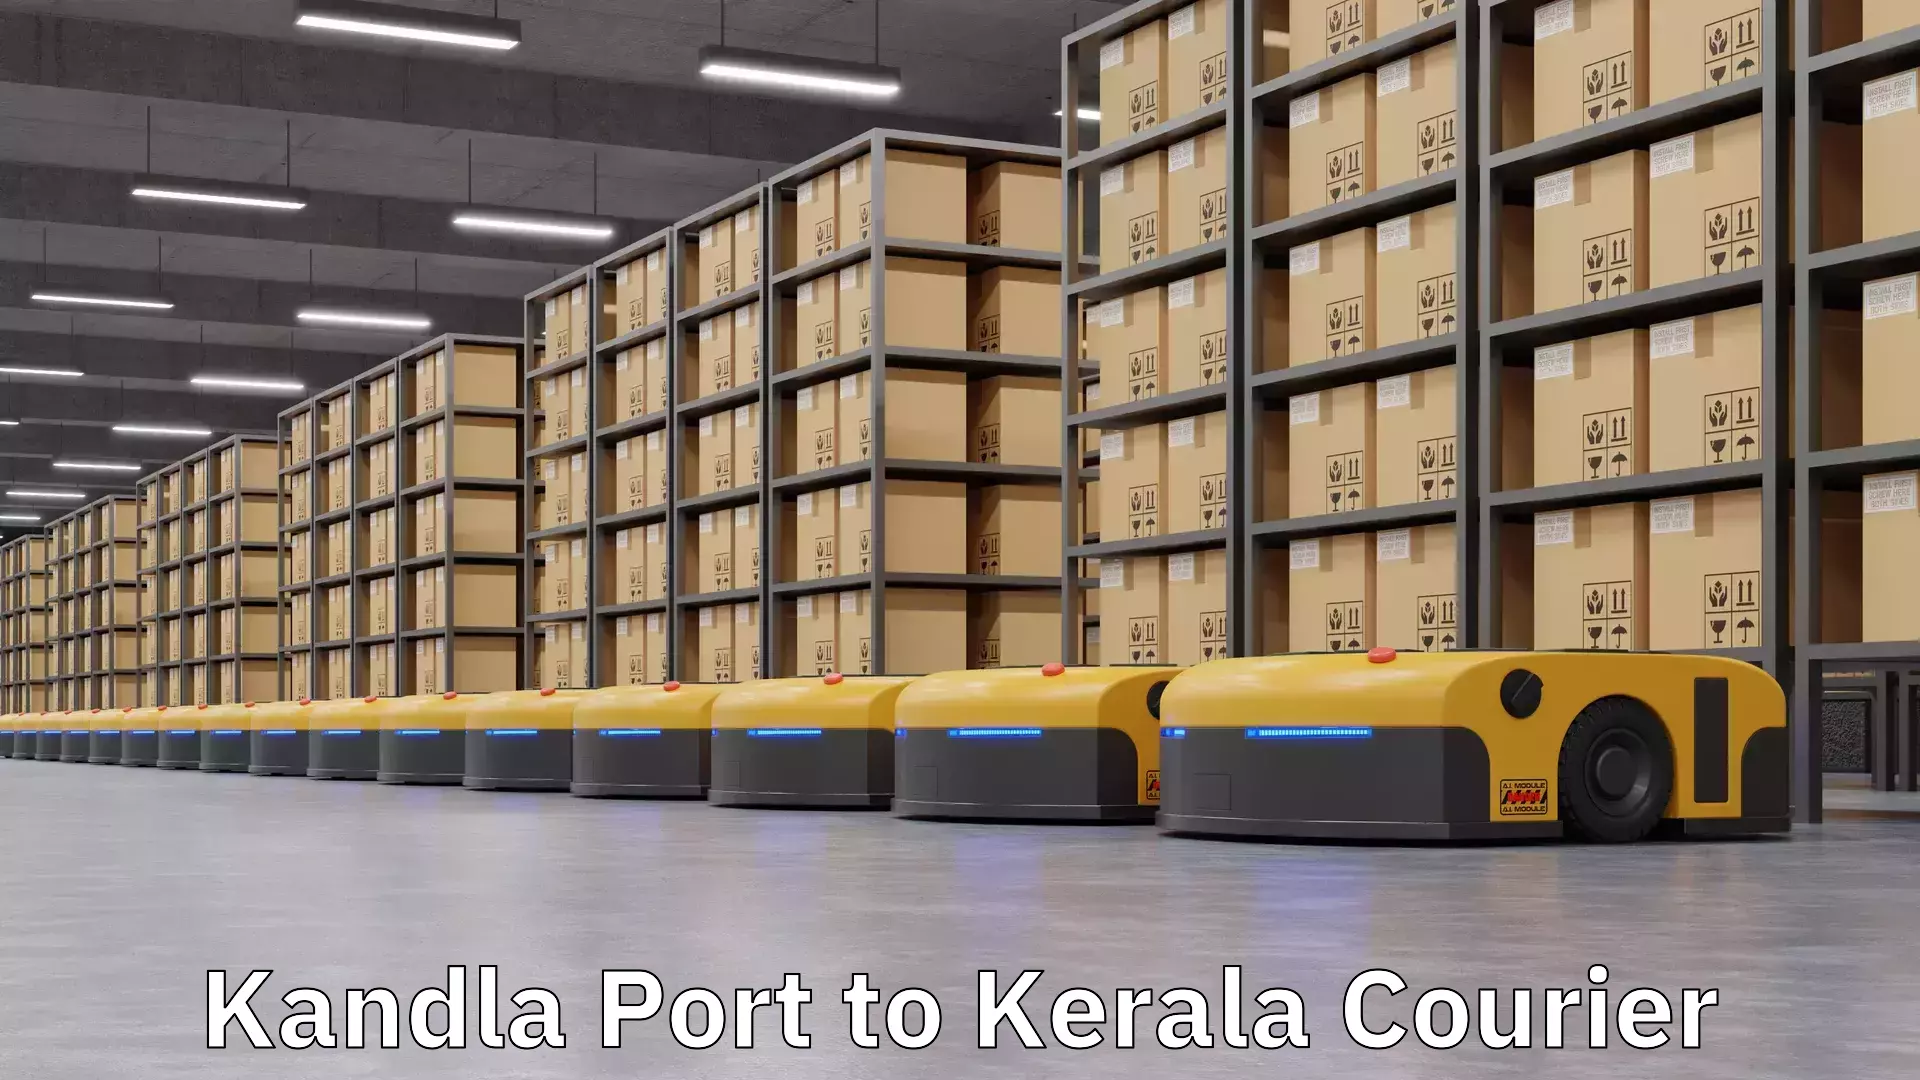 Supply chain delivery Kandla Port to Kerala